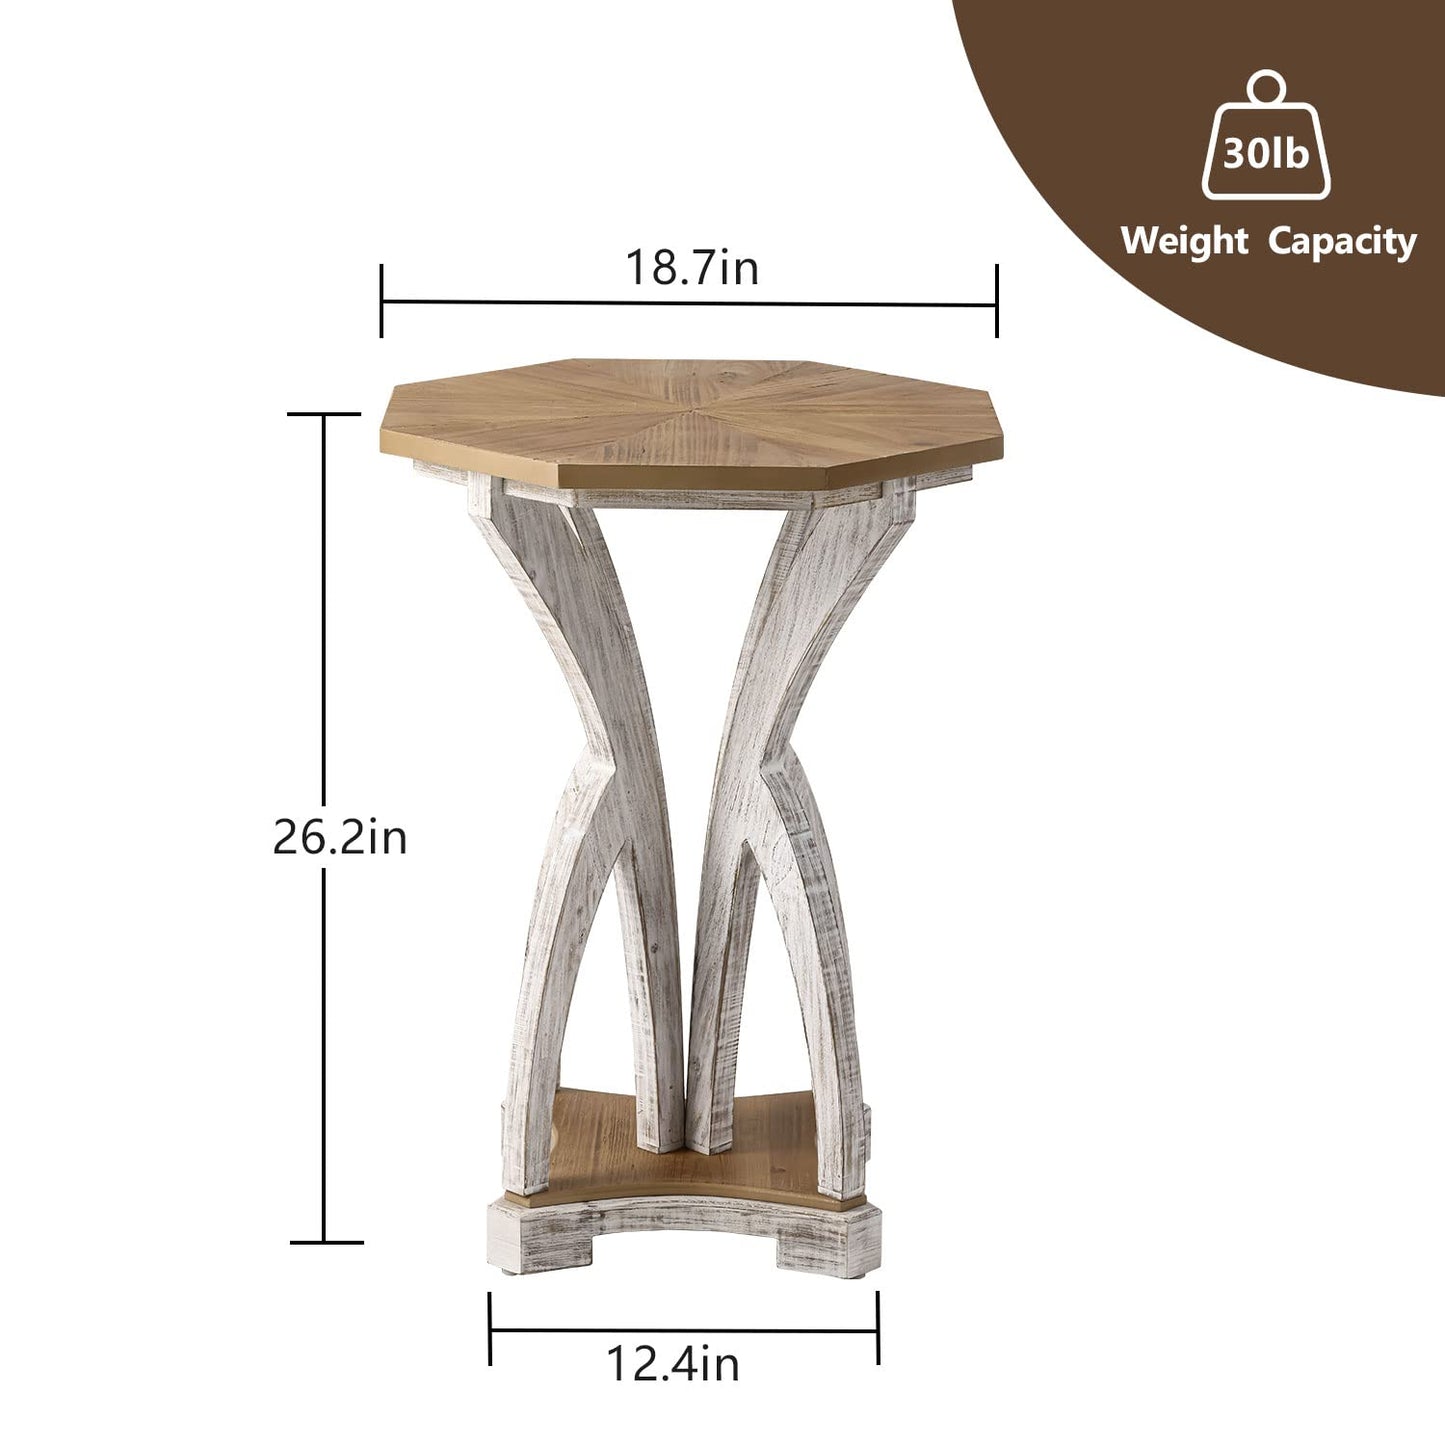 COSIEST Set of 2 Rustic Accent End Table, Octagonal Farmhouse Wood Side Table with Curved Legs Pedestal Design for Living Room, Bedroom, Distressed Whitewash Finish